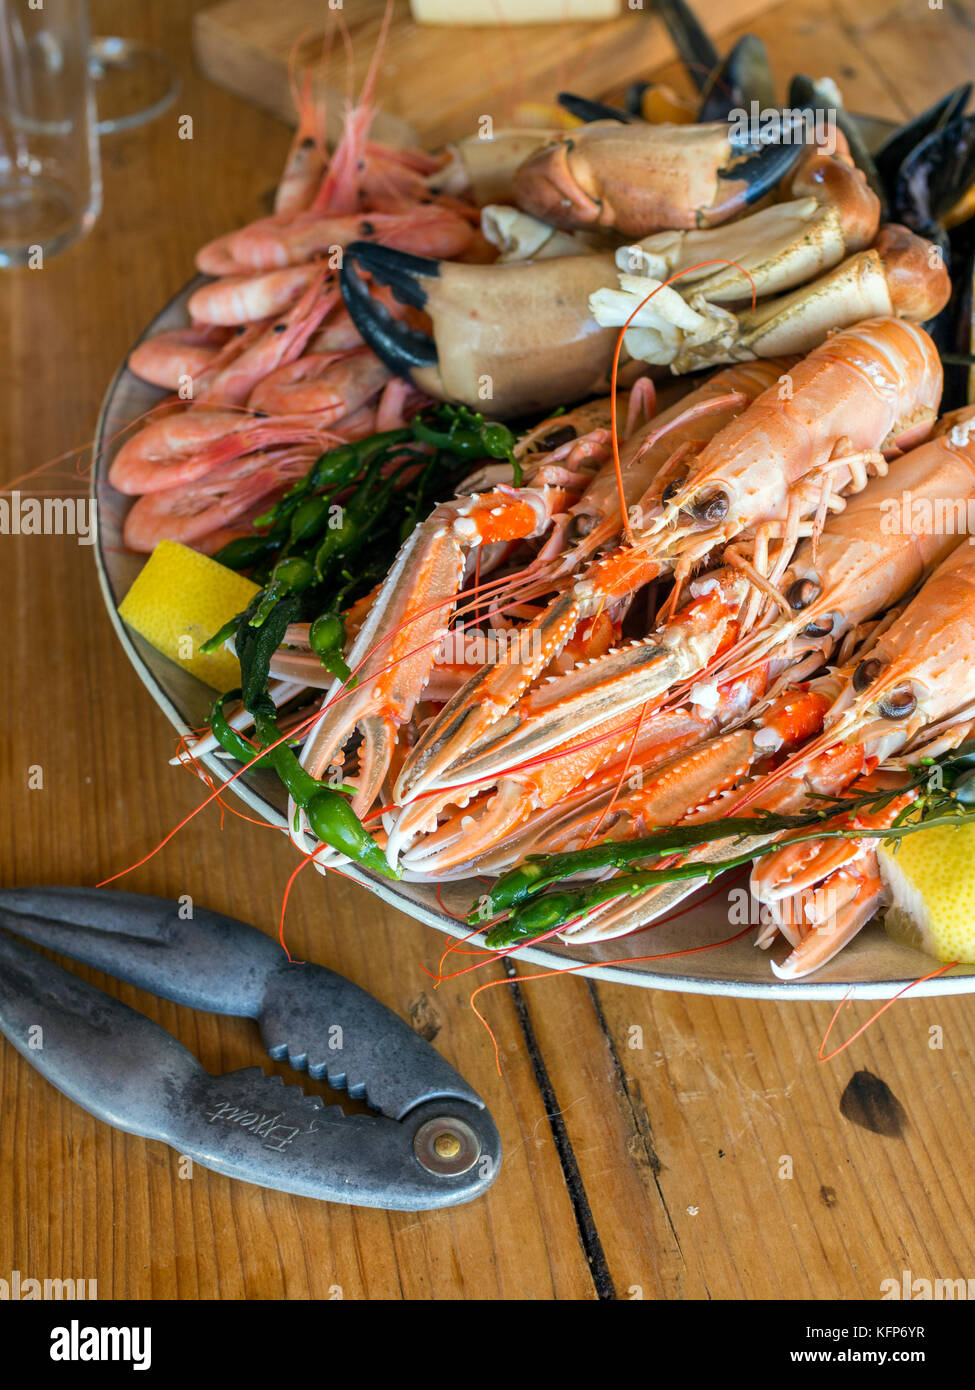 A seafood platter at Everts Sjöbod’s, a  business offering oyster safaris,meals and accommodation out of a 19th century boathouse in Grebbestad Stock Photo